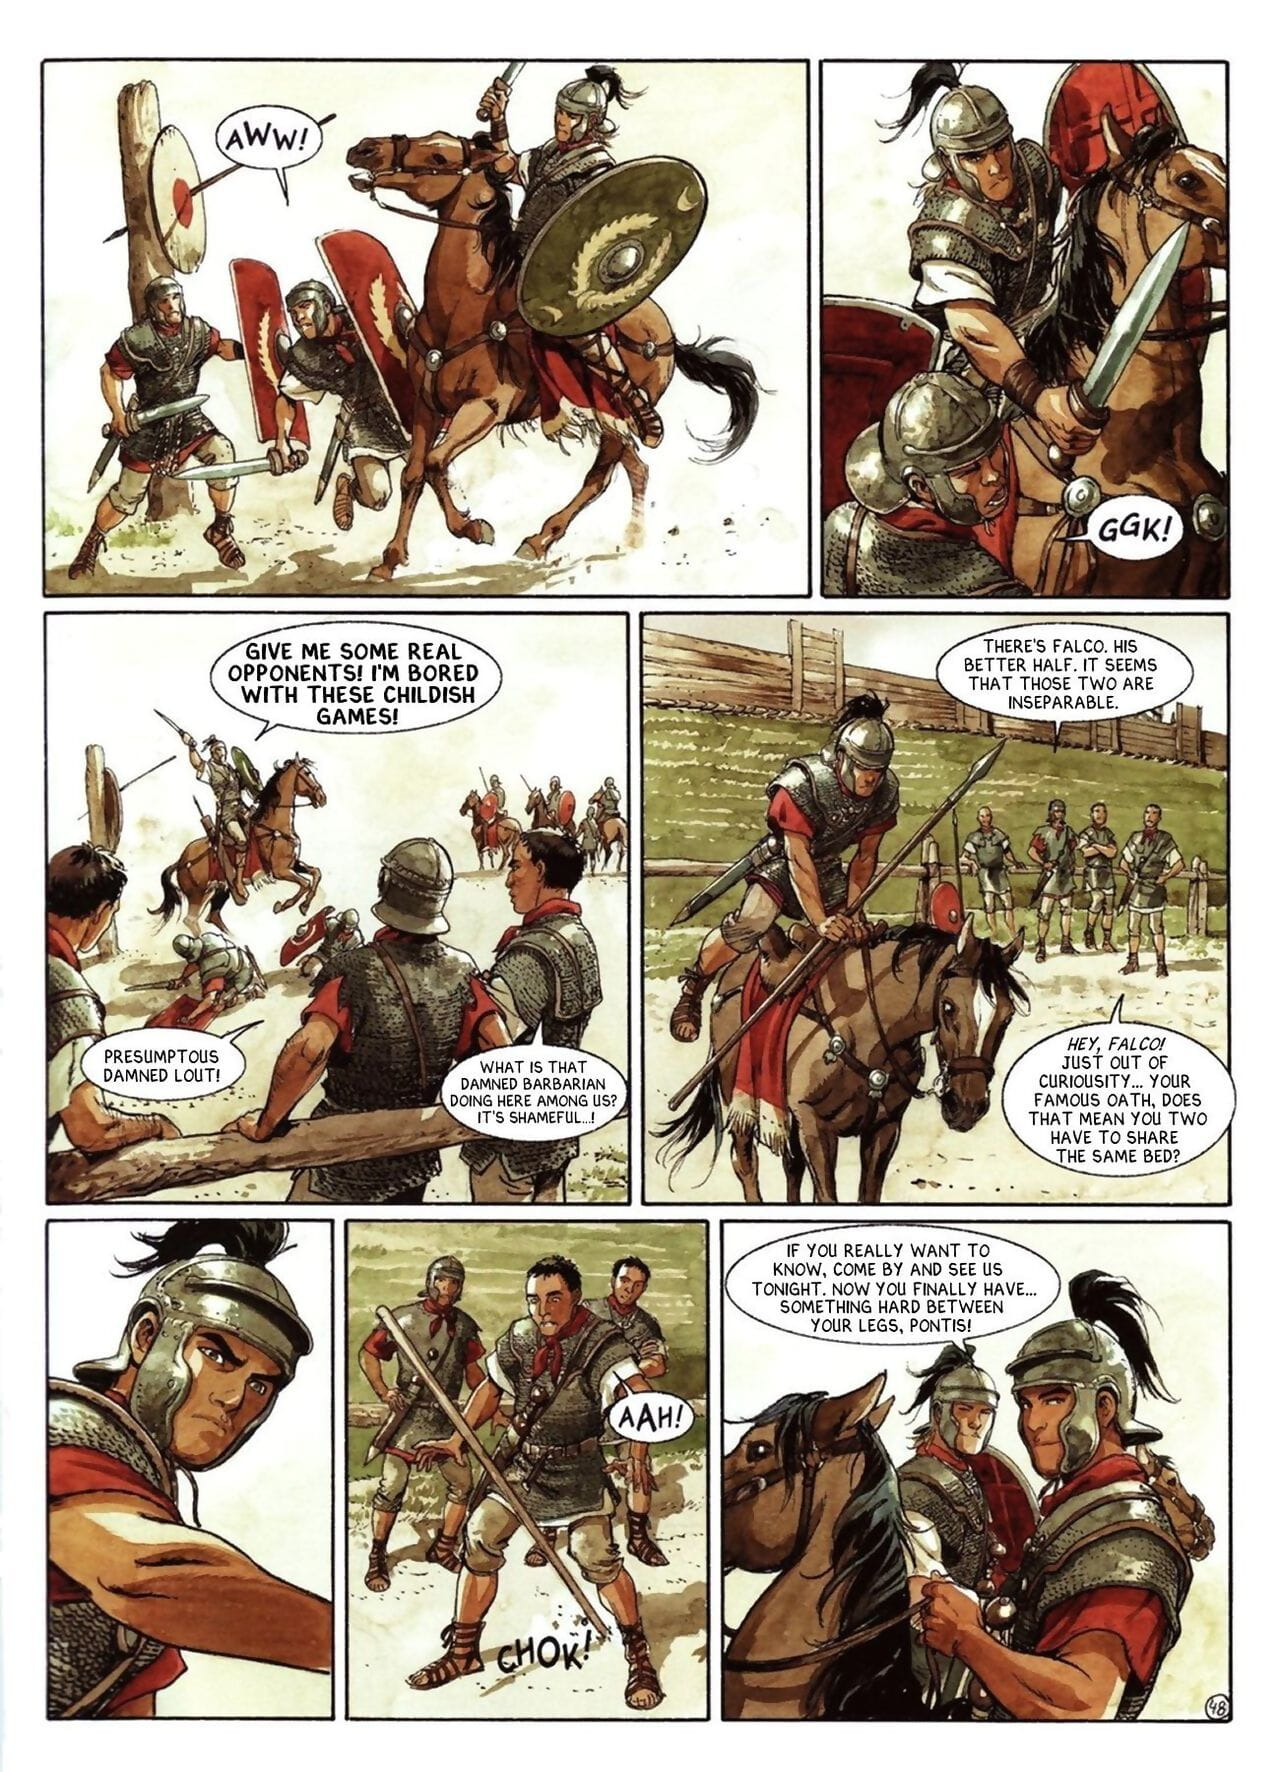 The Eagles of Rome - Volume #01 - part 2 page 1